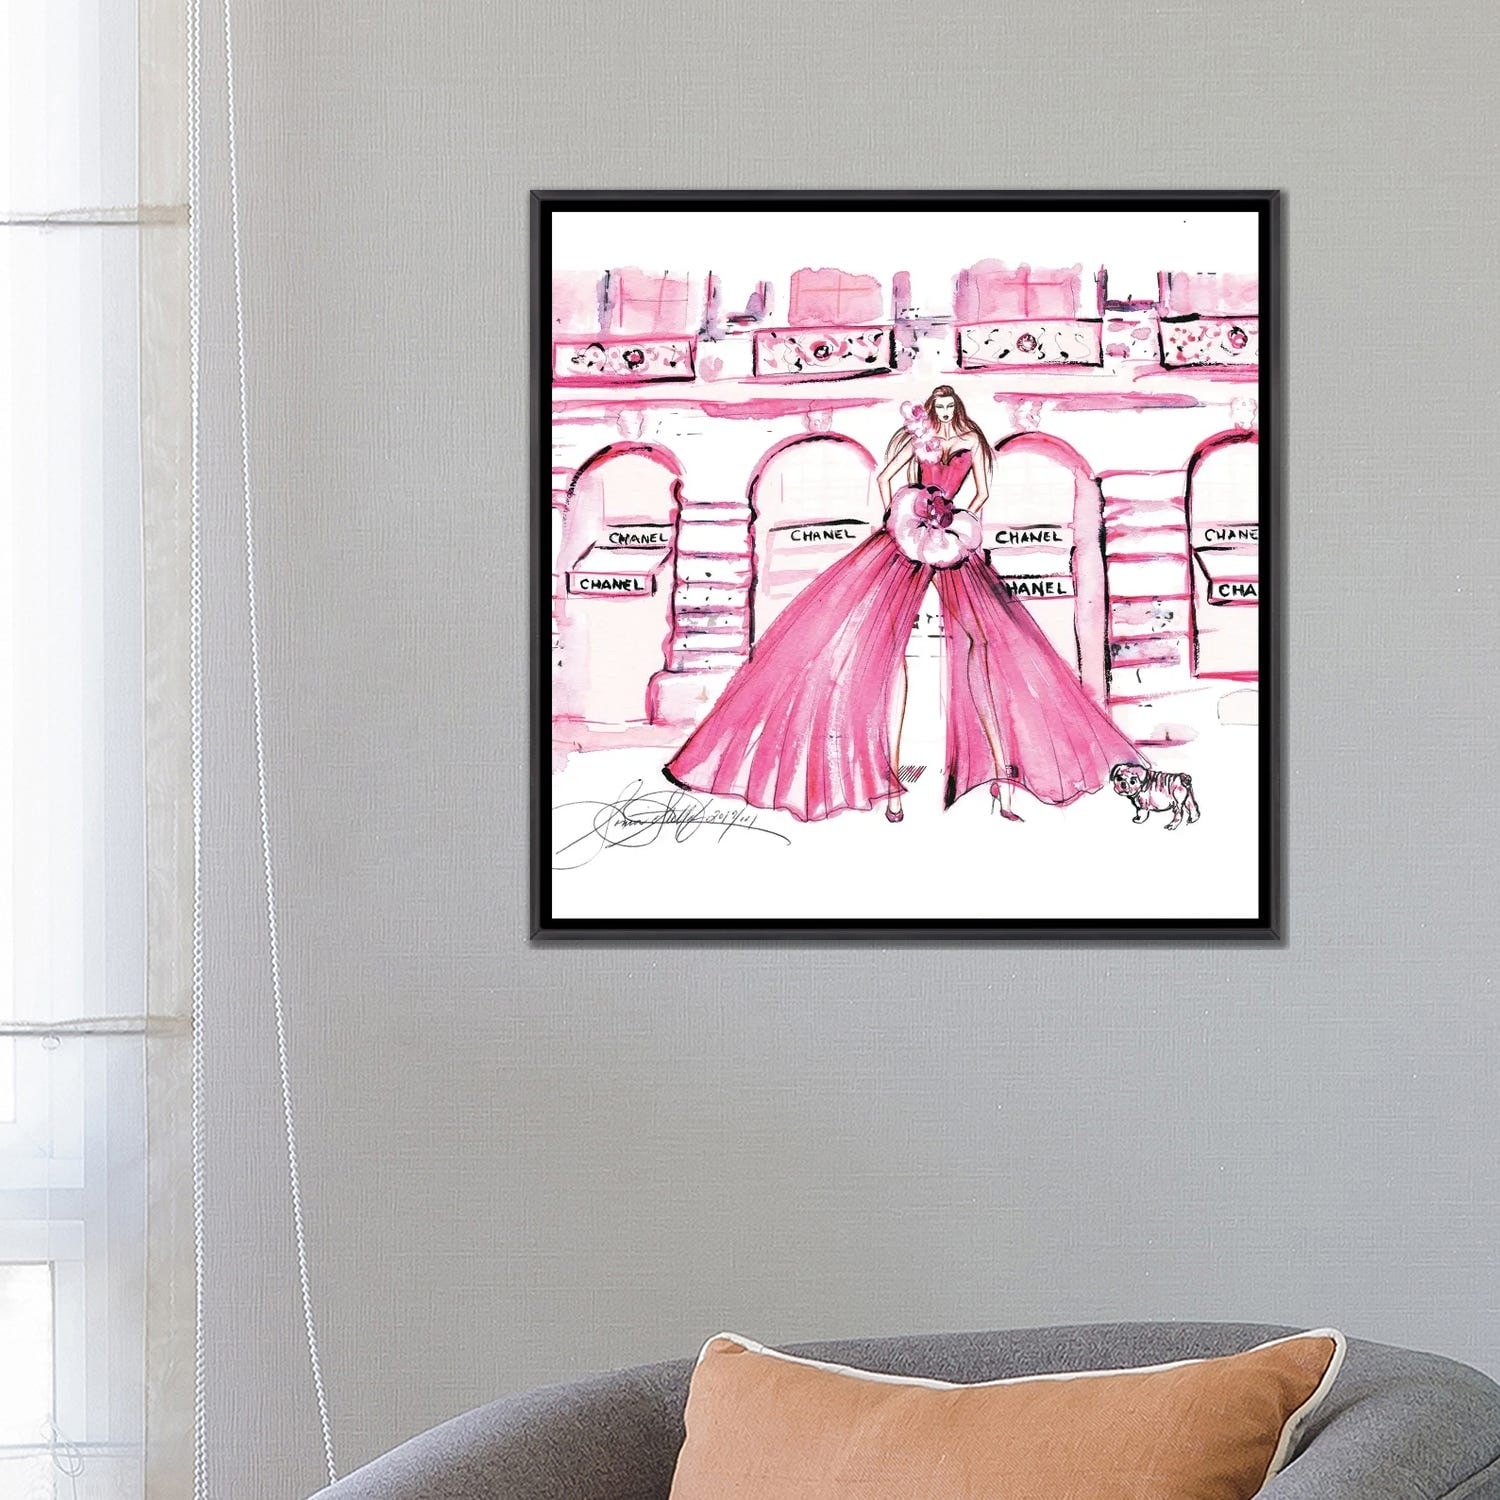 iCanvas Pink Chanel Shop Watercolor by Sonia Stella Framed - Bed